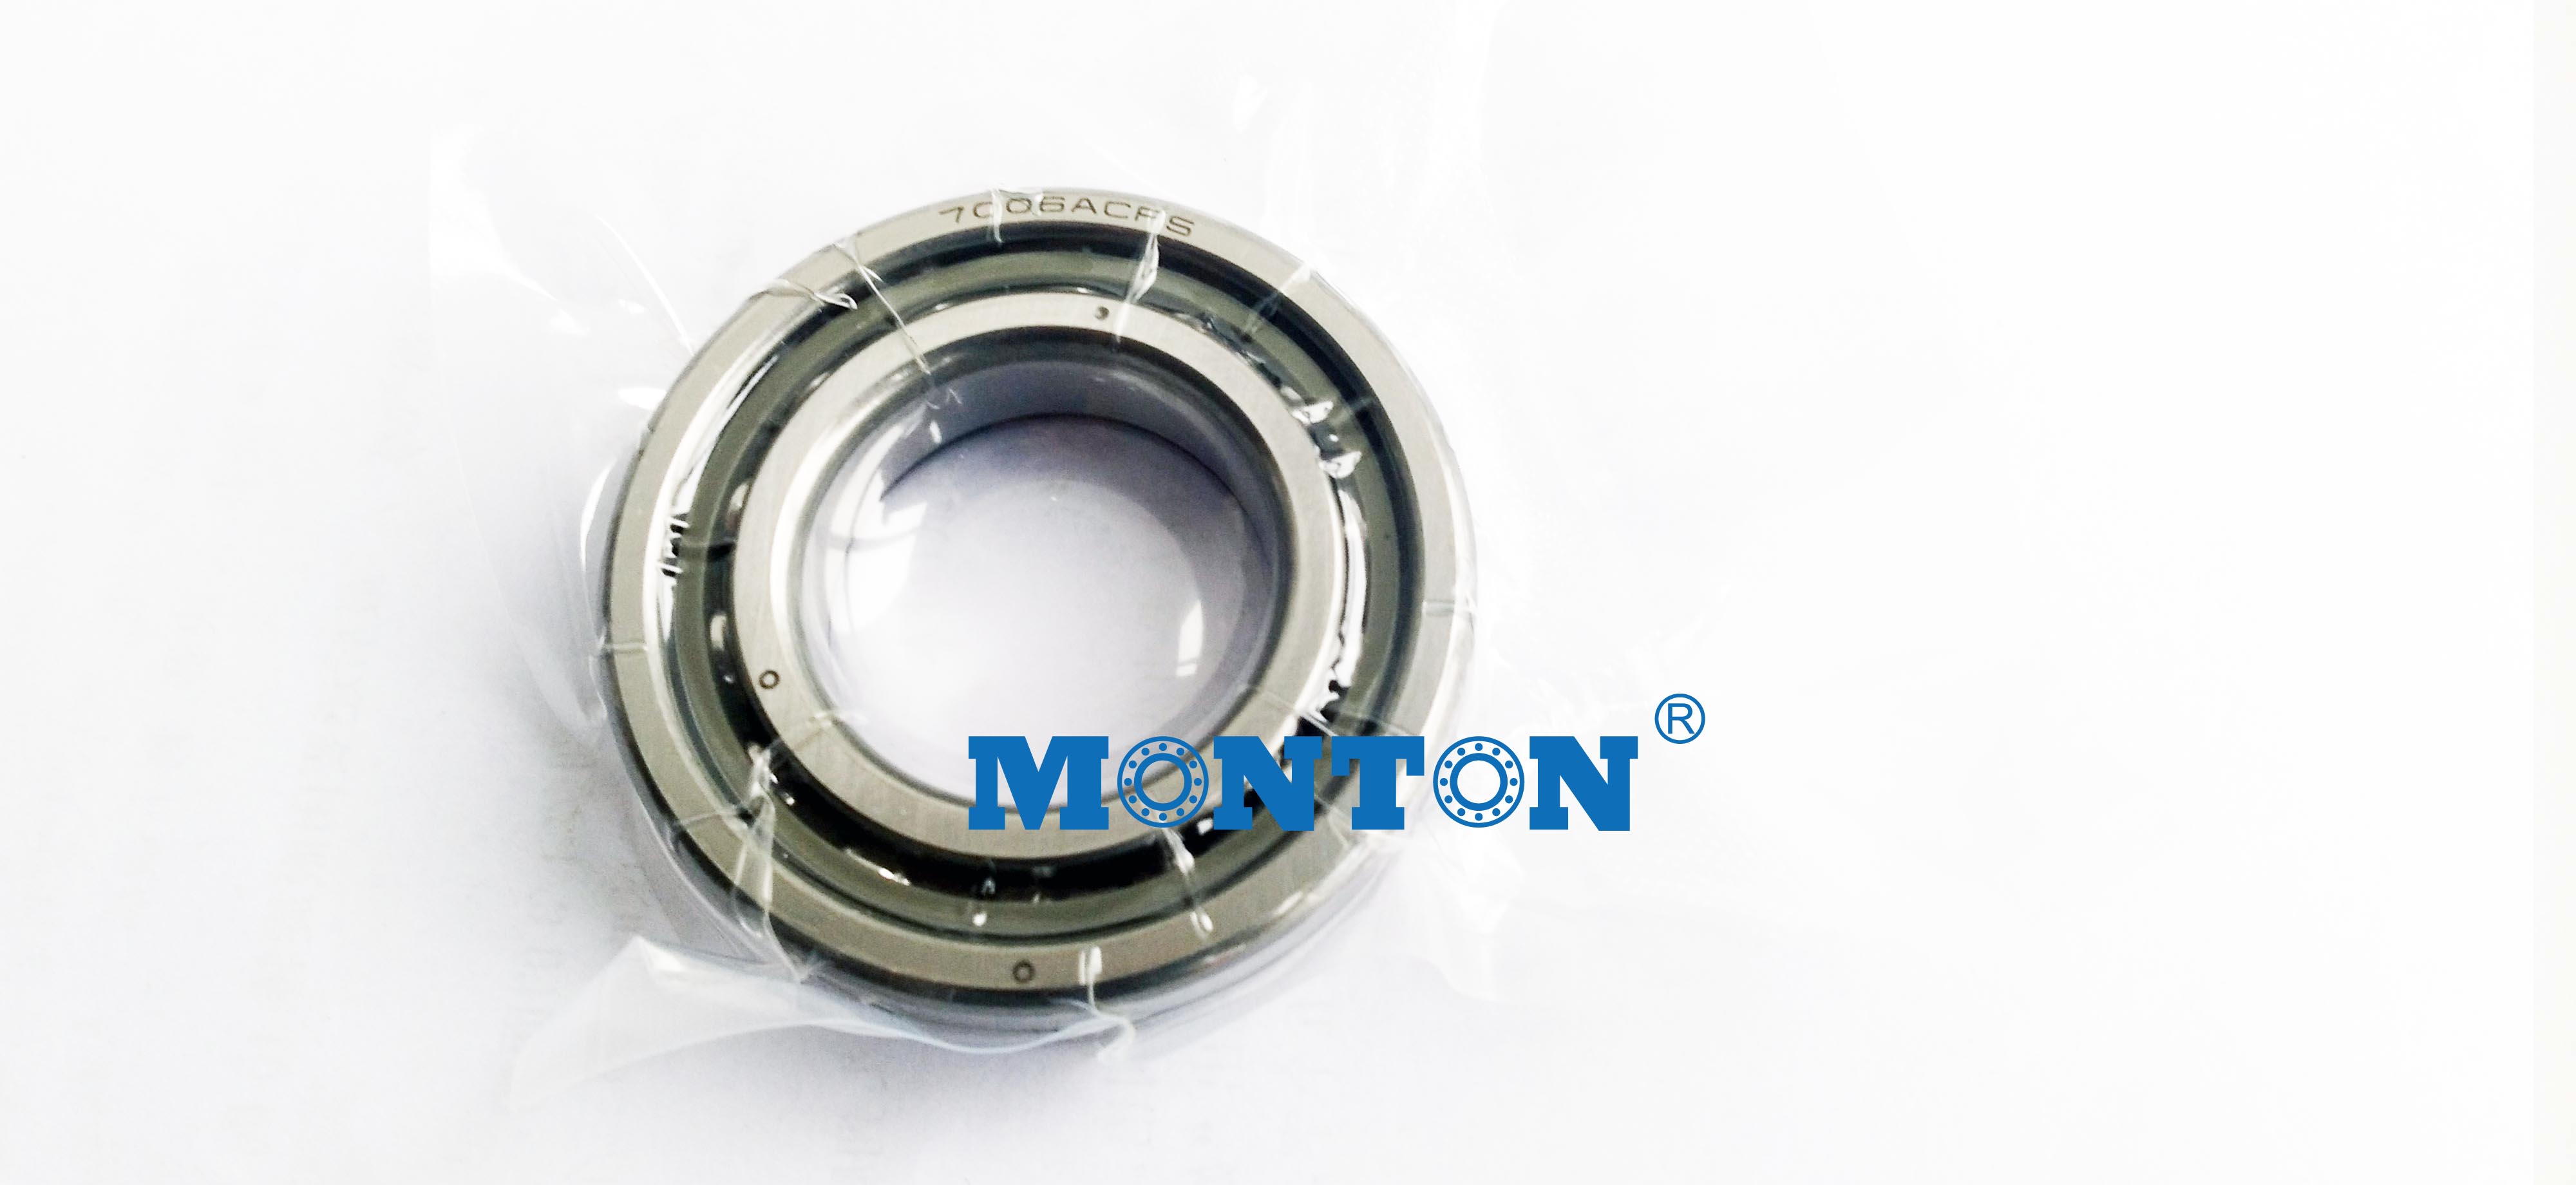 7205 ACDP4ADGA Super Precision Angular Contact Bearing - 25 mm ID, 52 mm OD, 15 mm Width, 25 ° Contact, ABEC 7